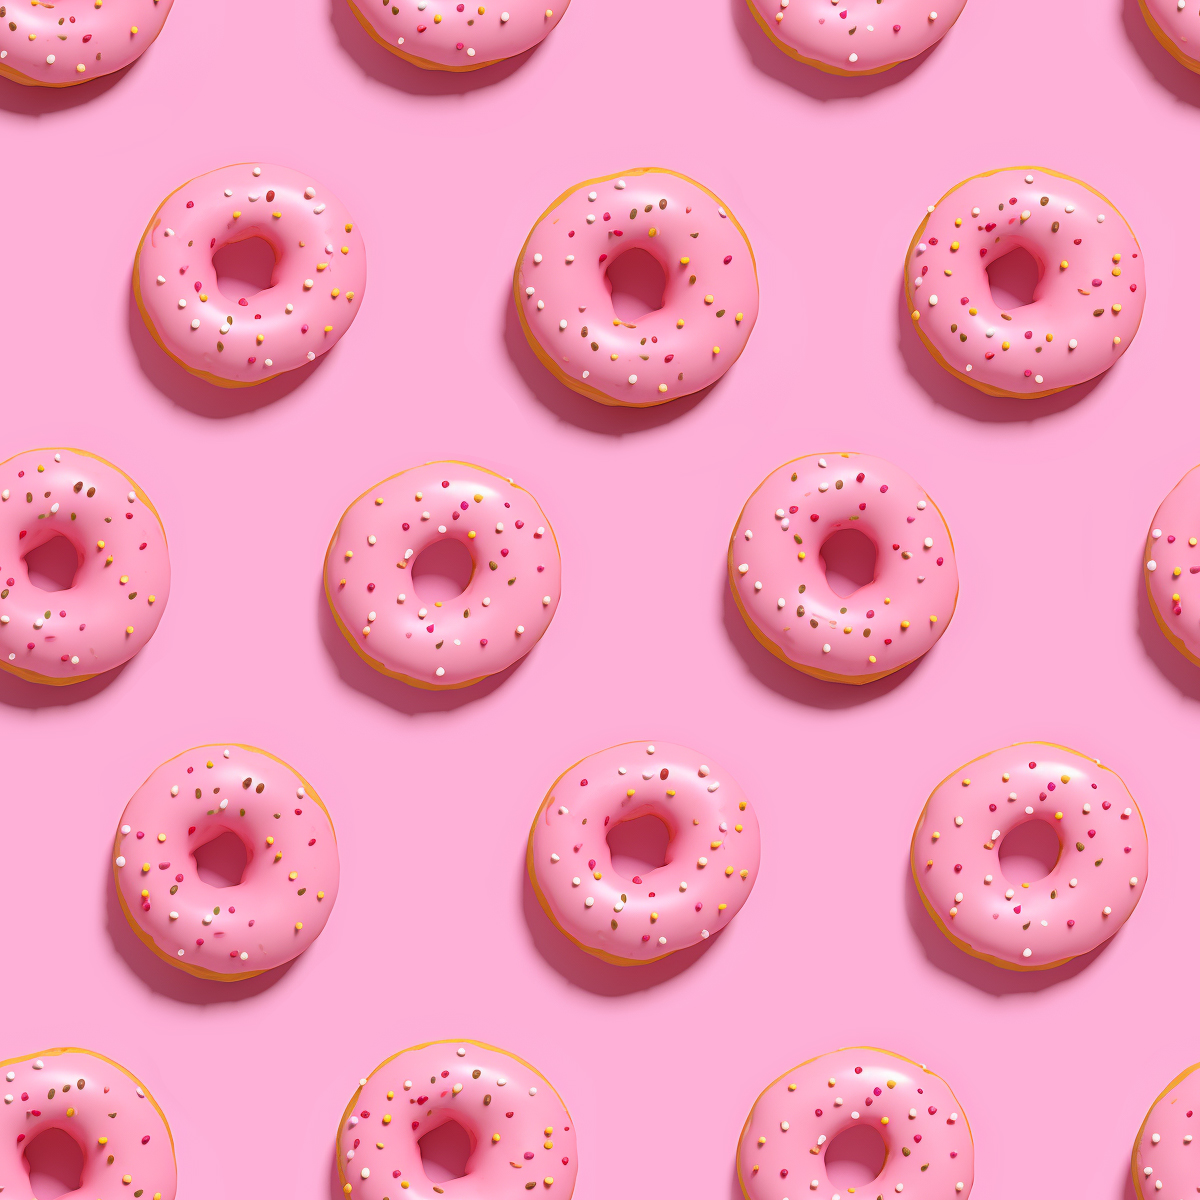 Seamless Texture Donuts On Pink Background Free Stock Photo